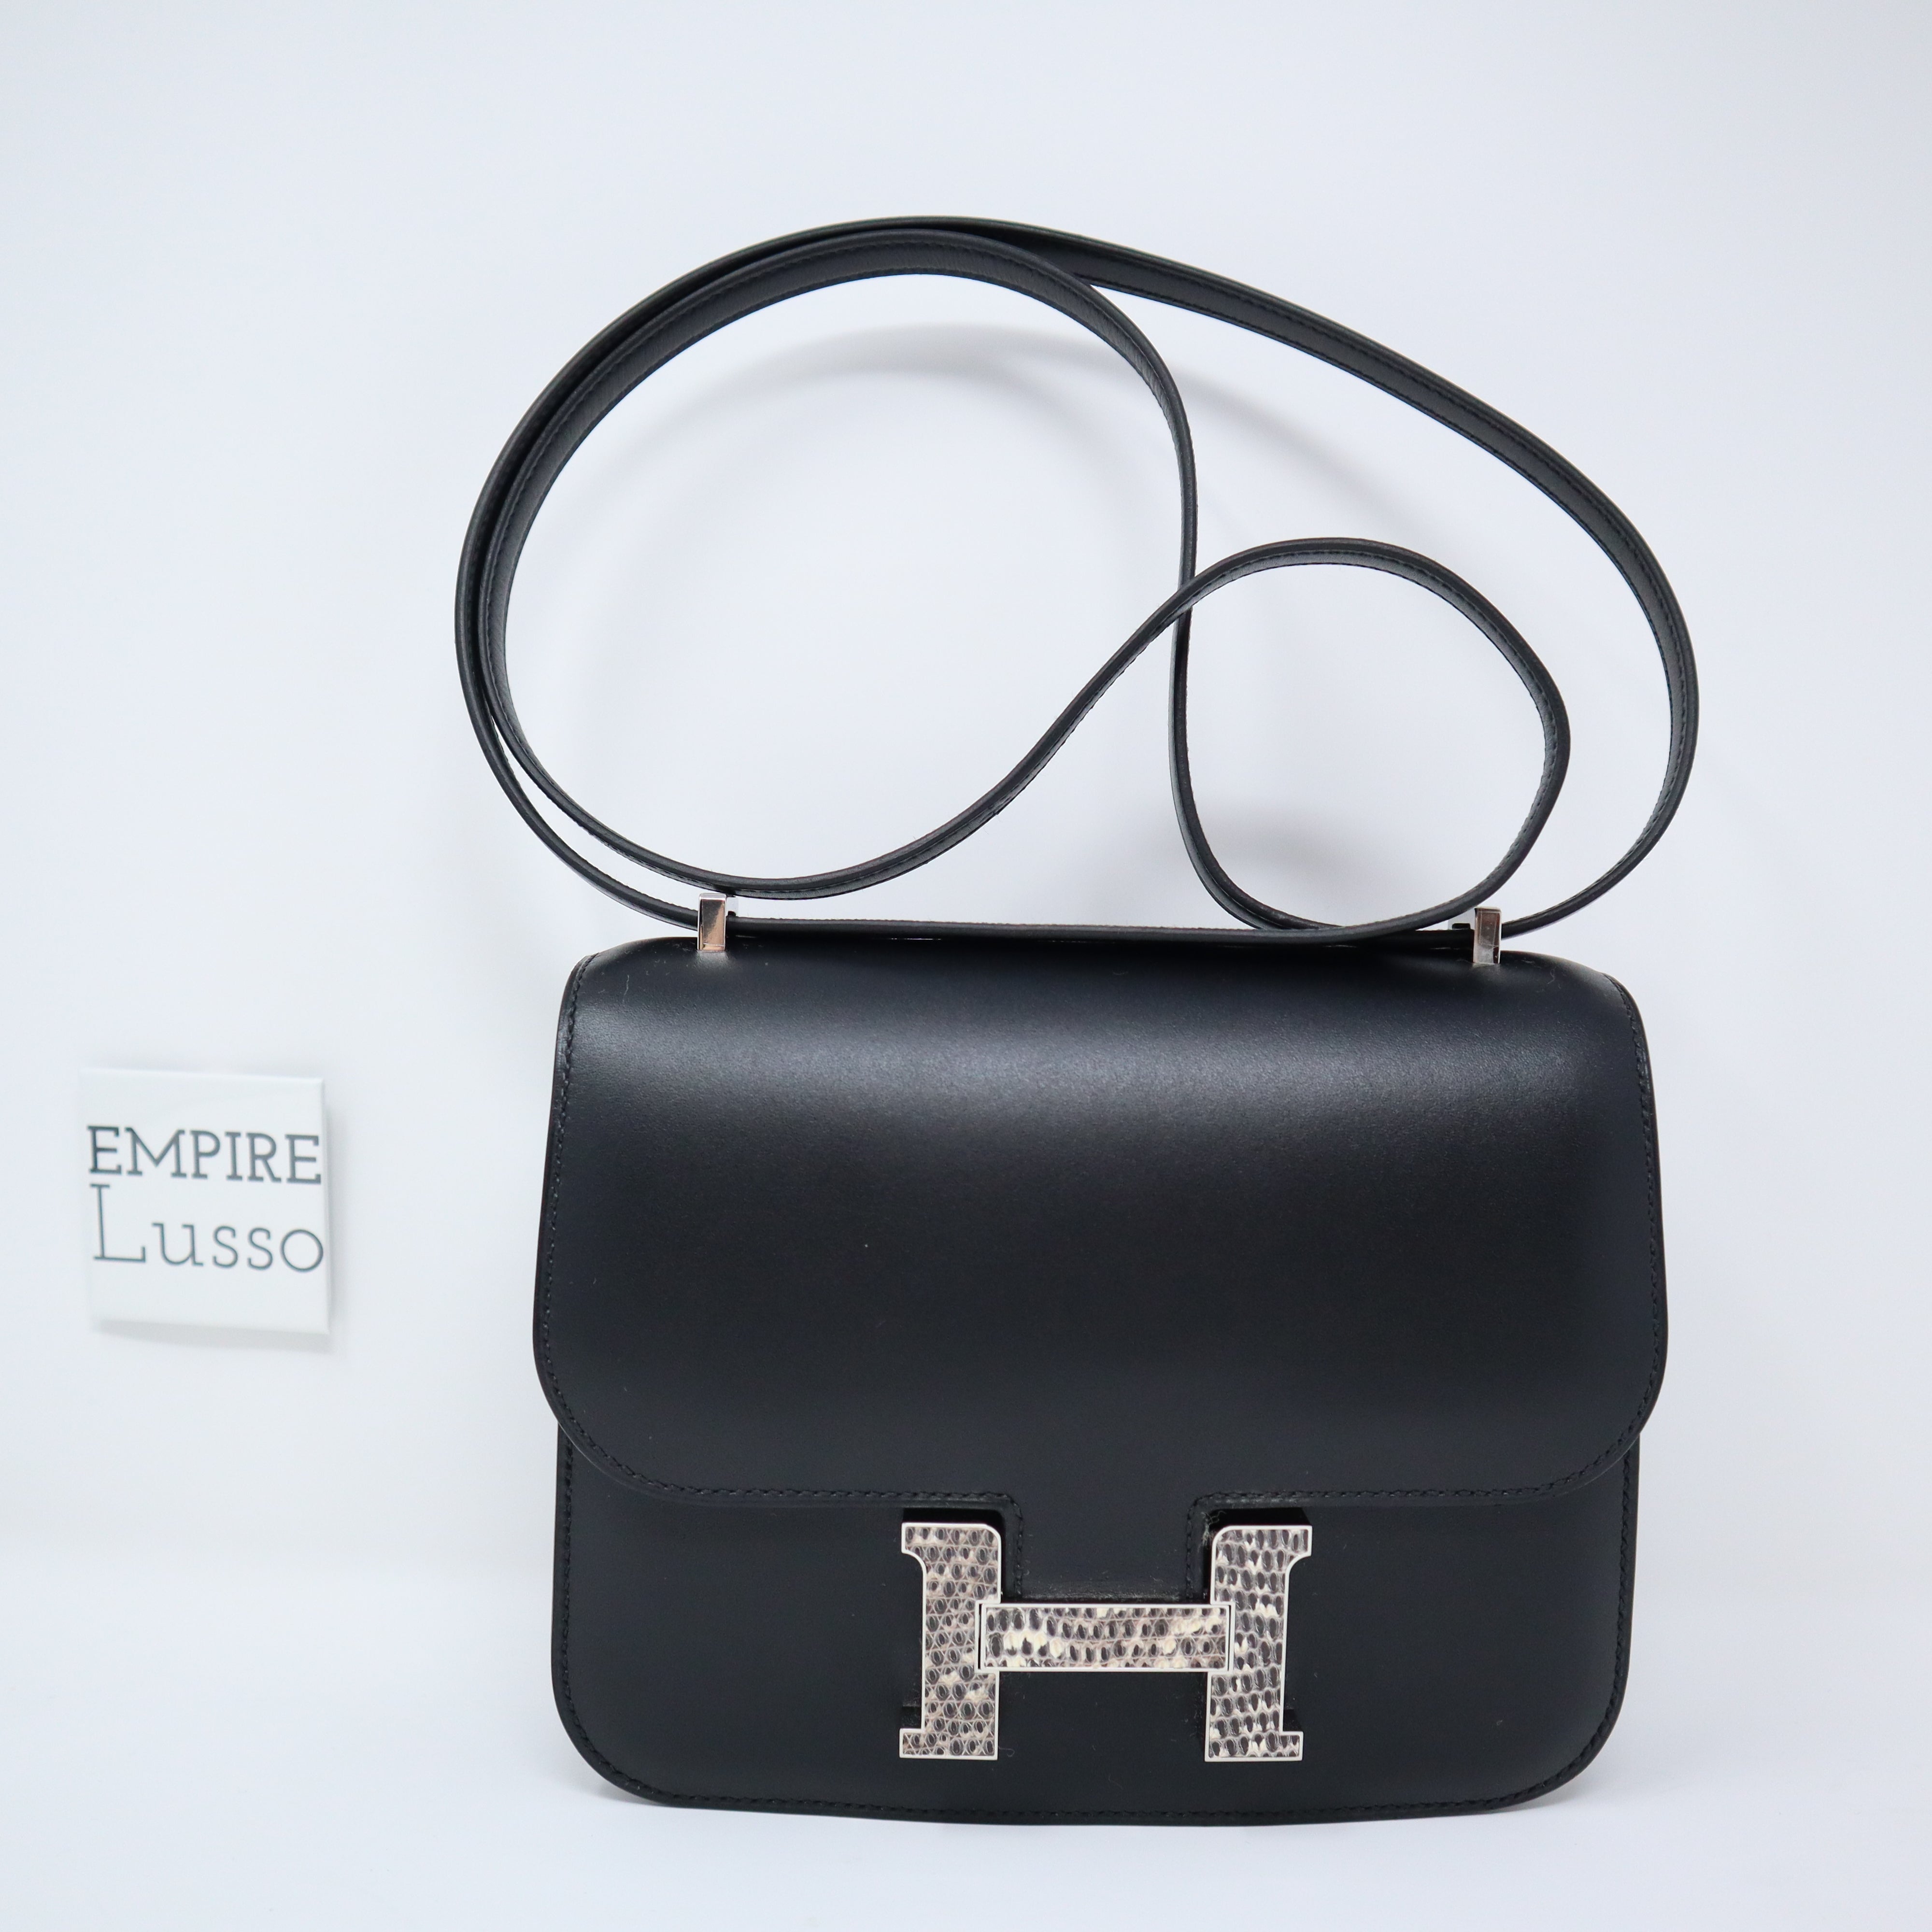 Hermès Black Constance 23cm of Box Leather with Palladium Hardware, Handbags and Accessories Online, 2019